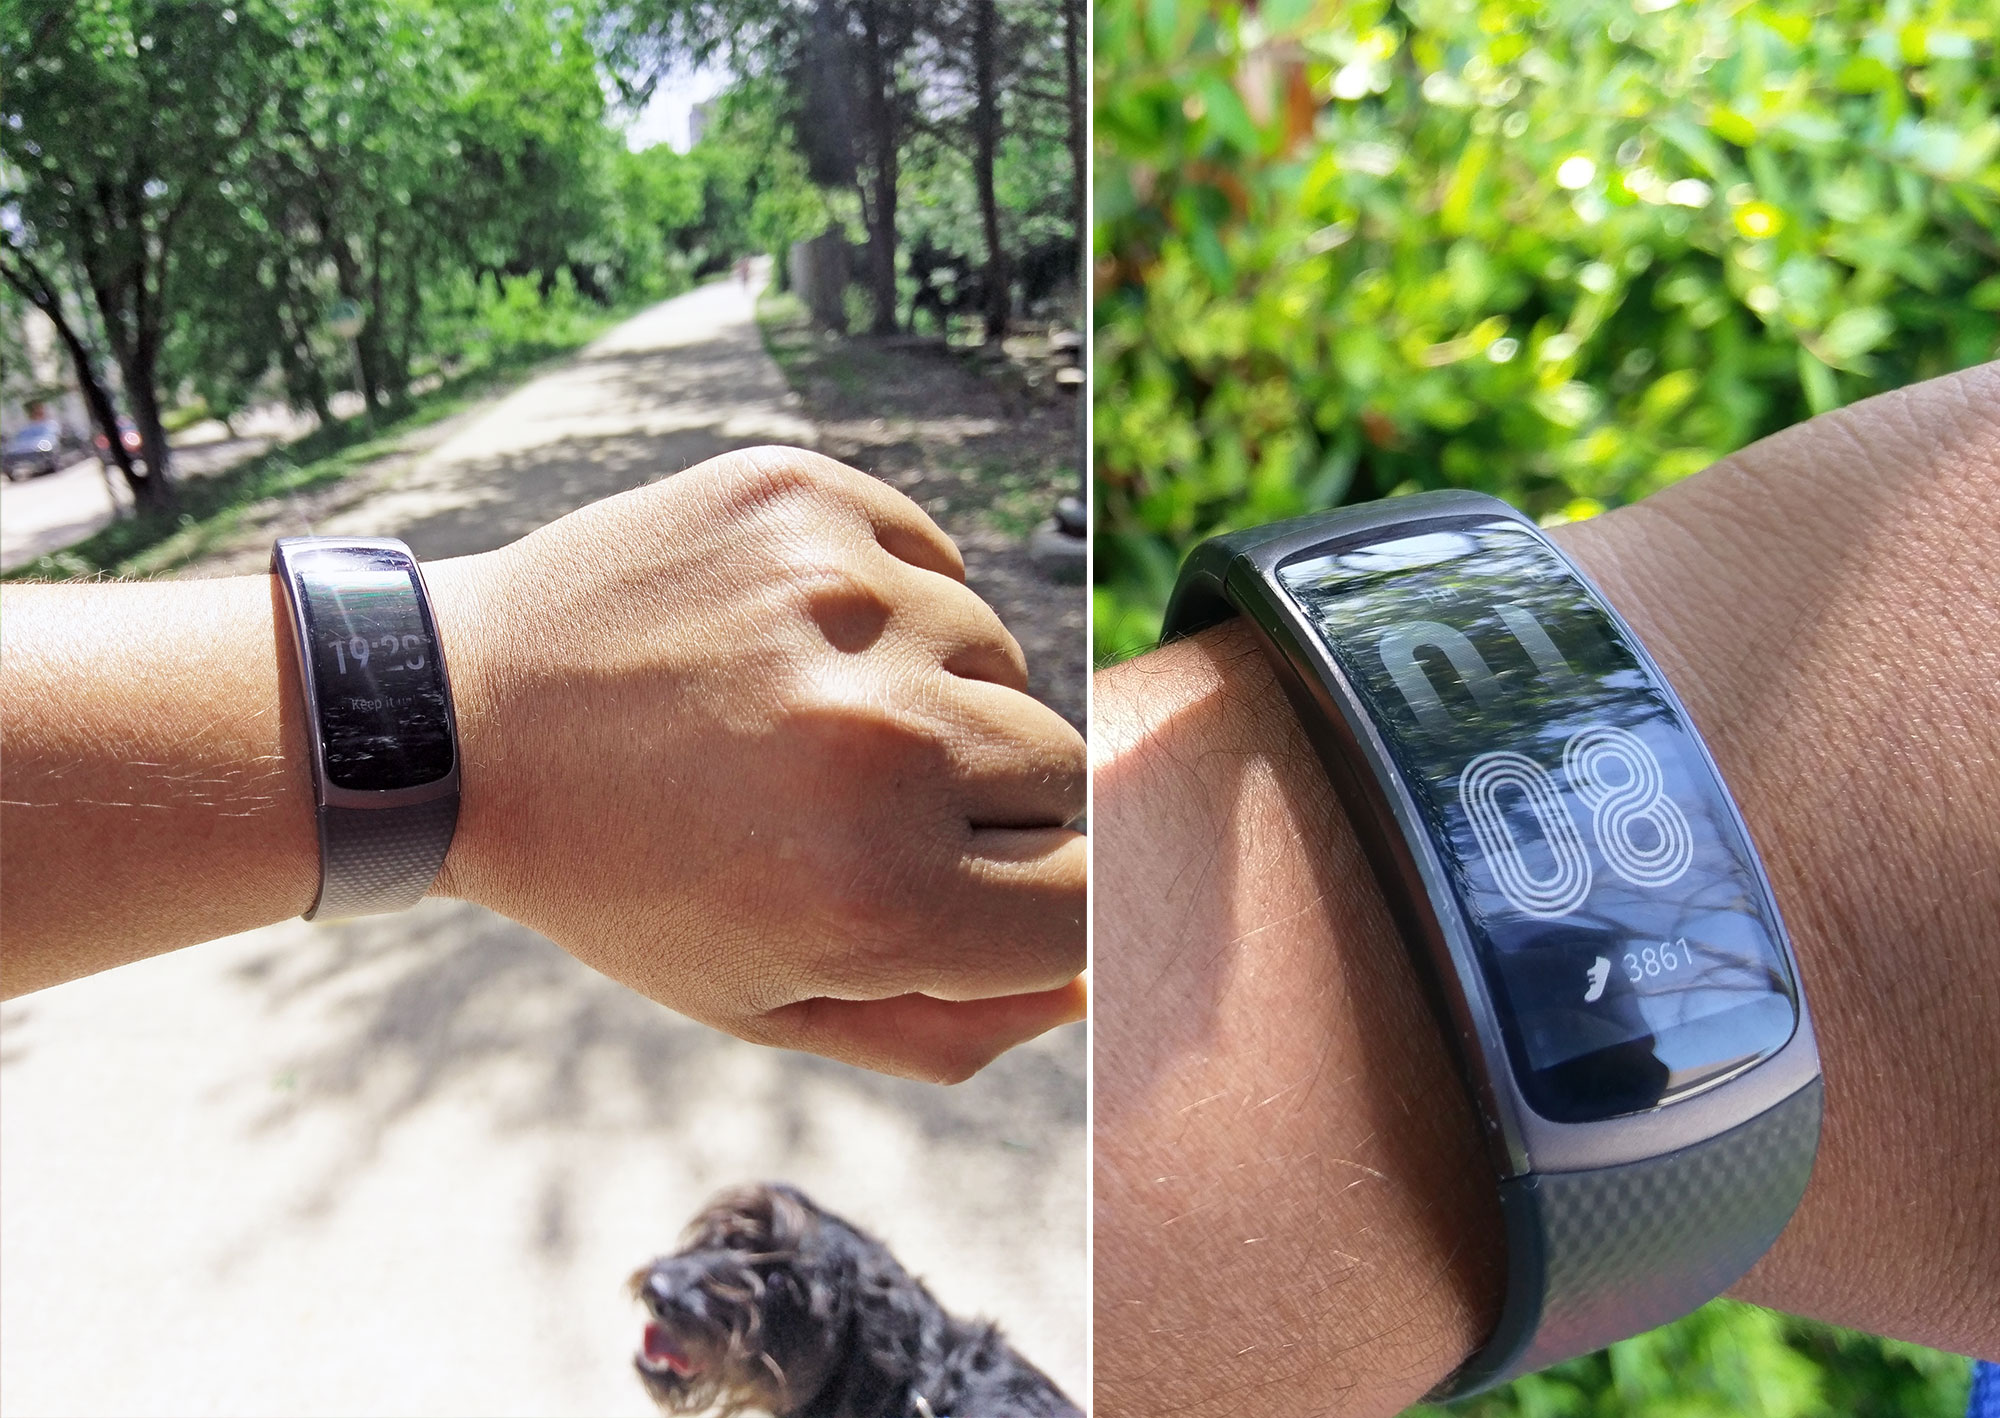 Checking my Samsung Gear Fit2 watch on the Katy Trail in Dallas.